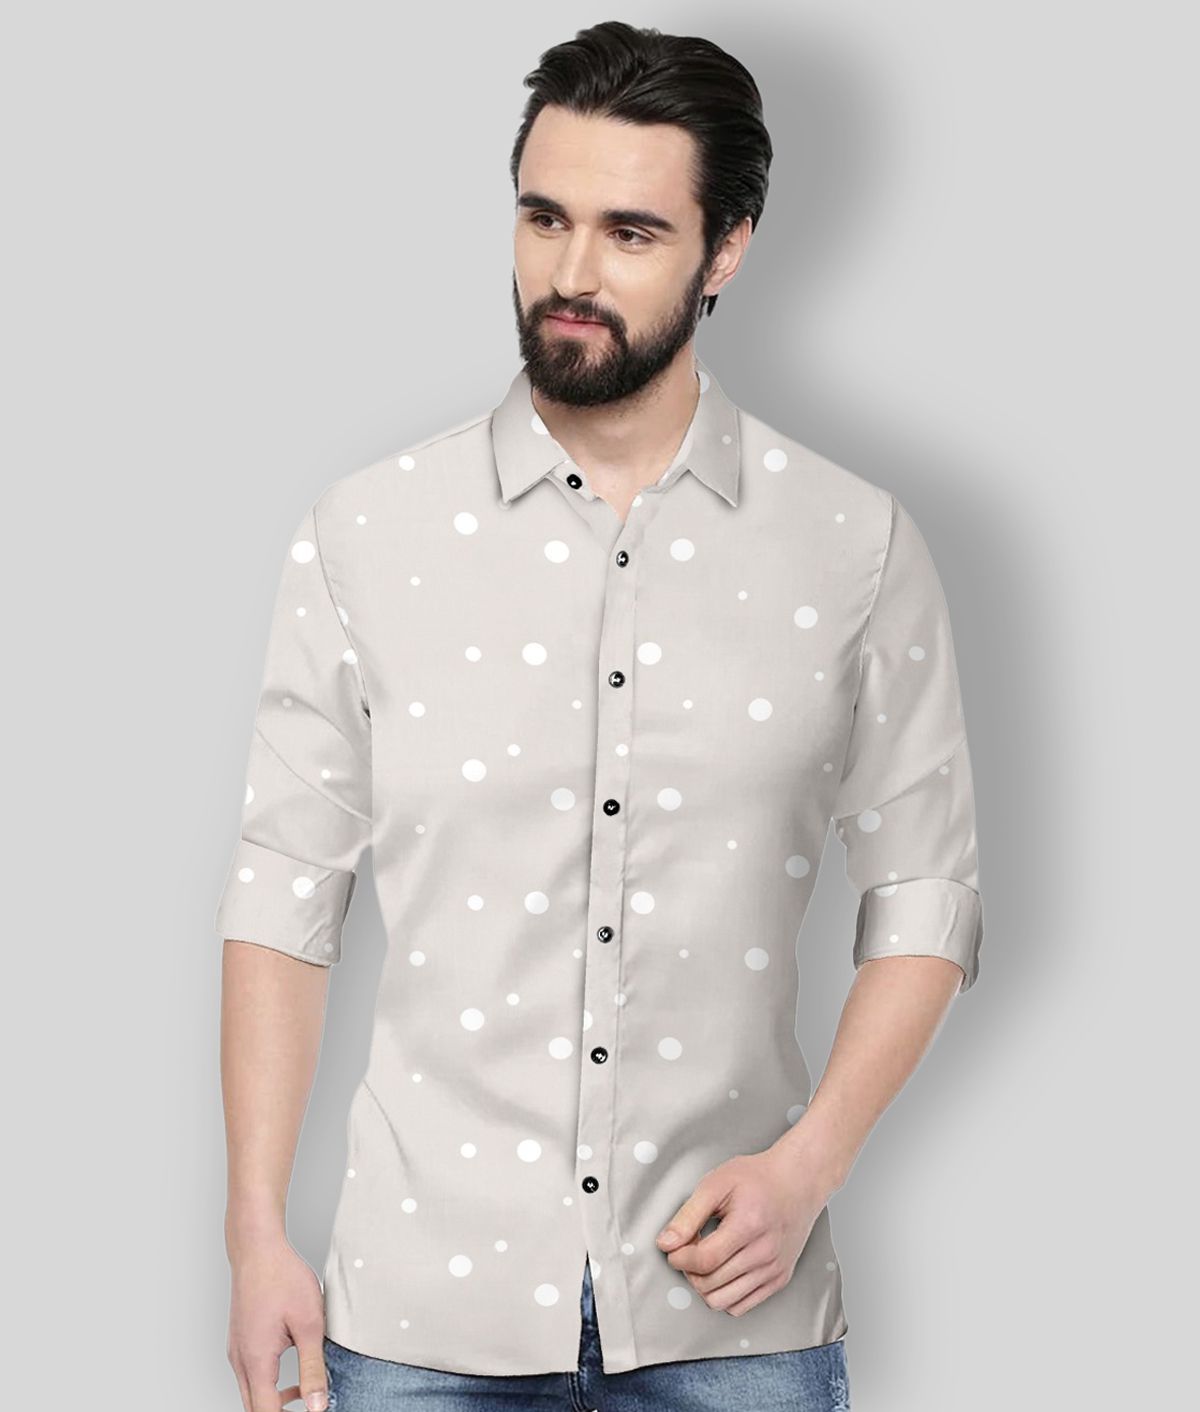     			P&V CREATIONS - Grey Cotton Blend Slim Fit Men's Casual Shirt (Pack of 1)